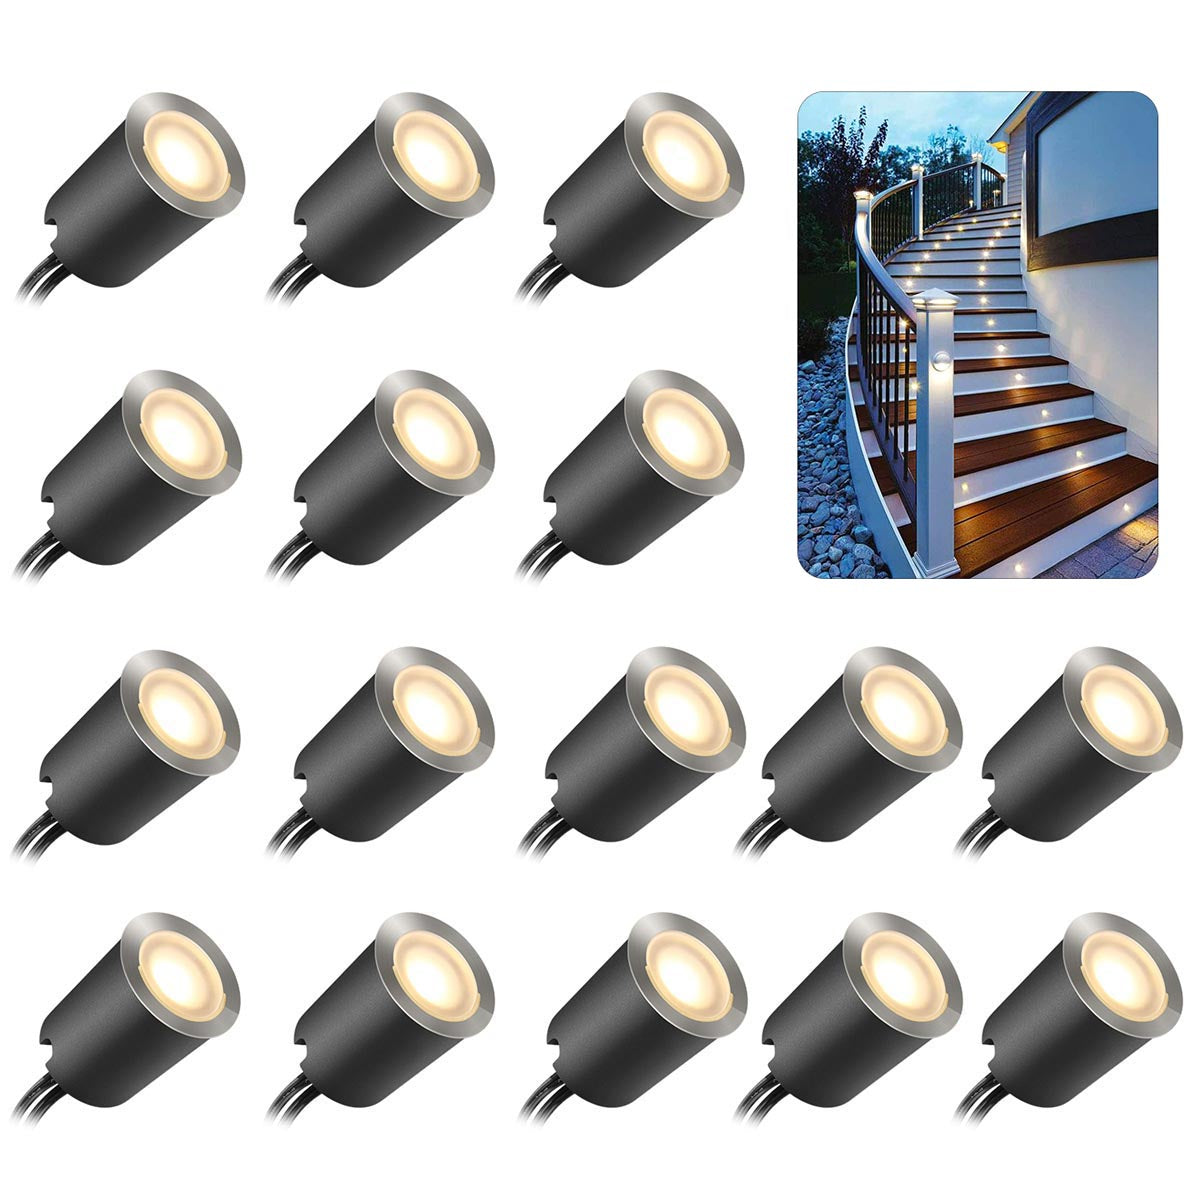 SEAL限定商品】 LED Deck Light その他